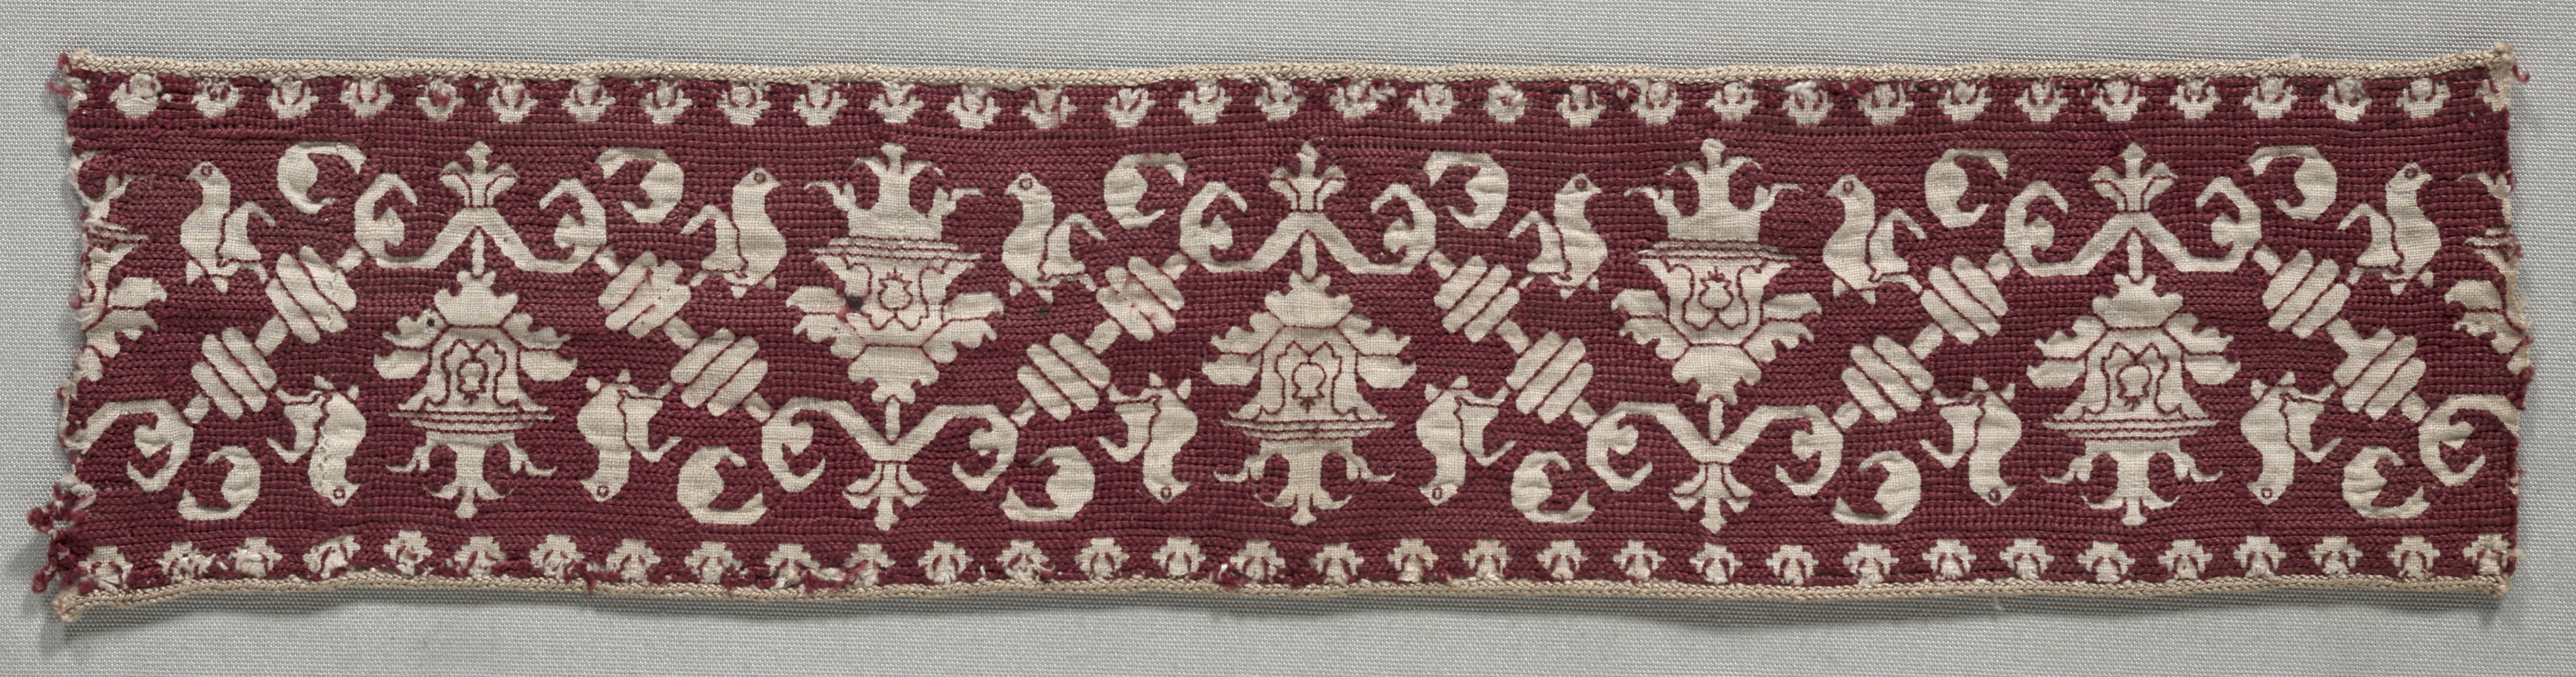 Embroidered Strip